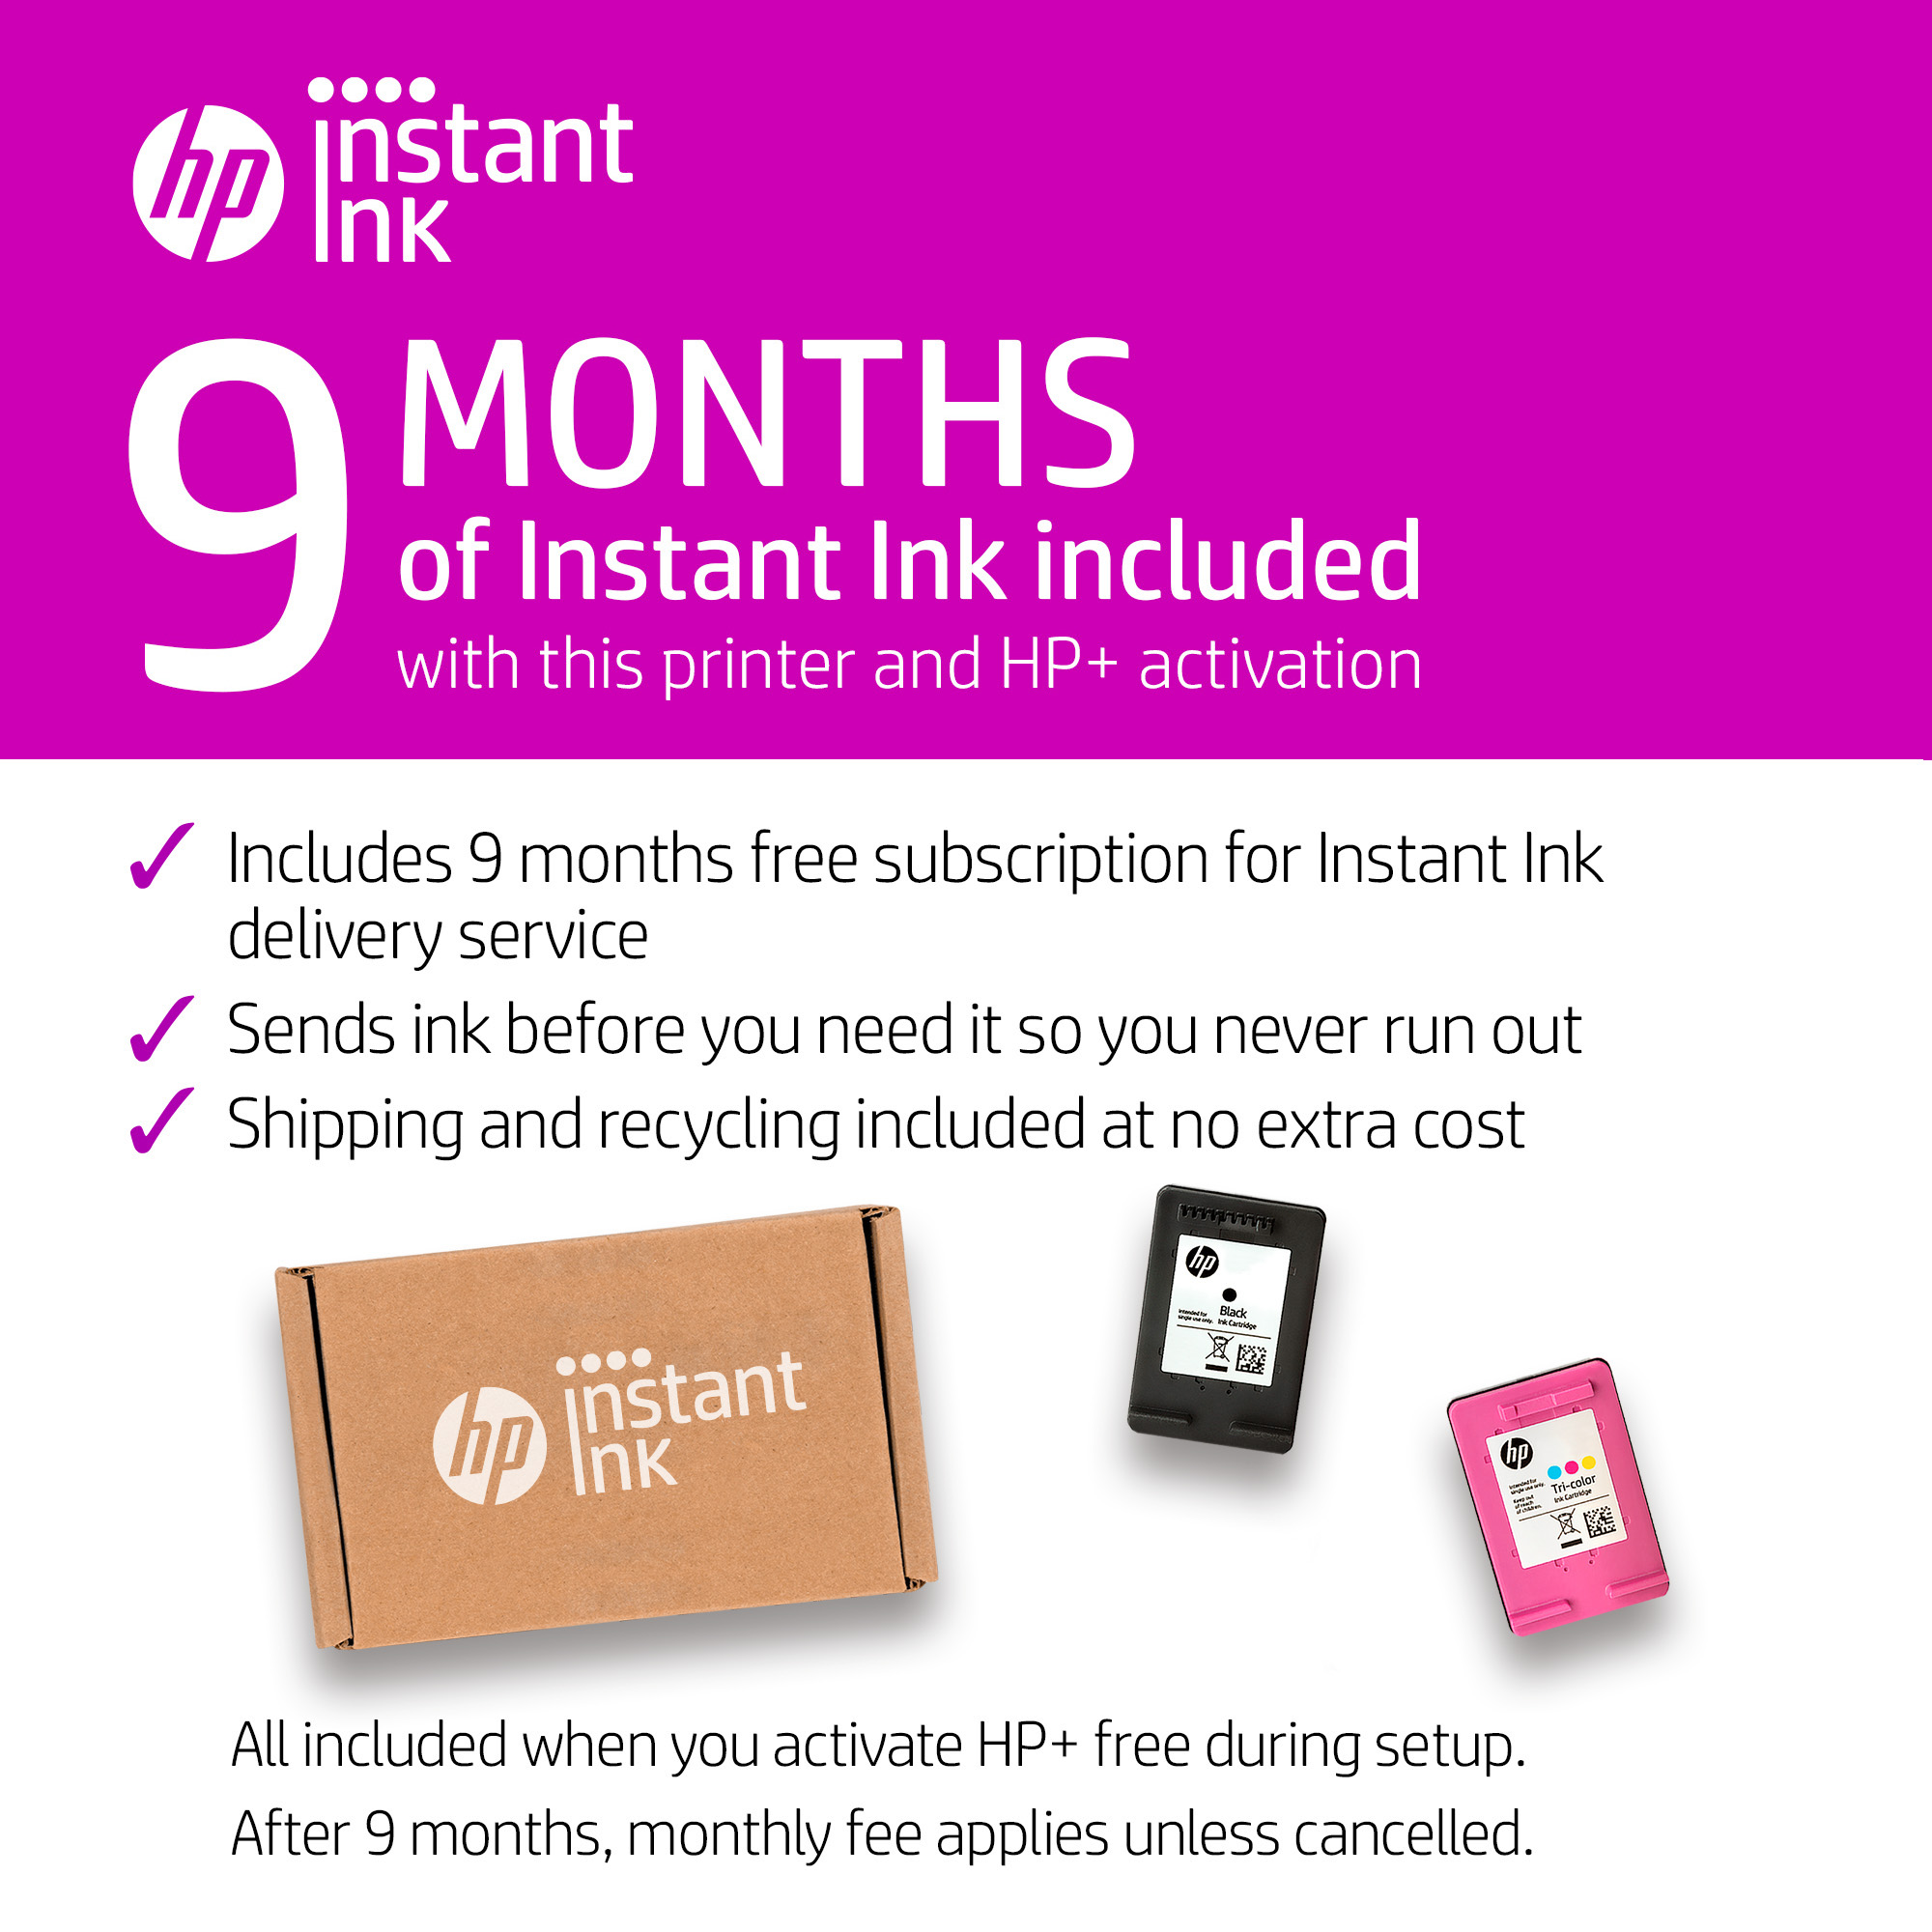 HP DeskJet 2723e All-in-One Wireless Color Inkjet Printer with 9 Months Instant Ink Included with HP+ - image 4 of 10